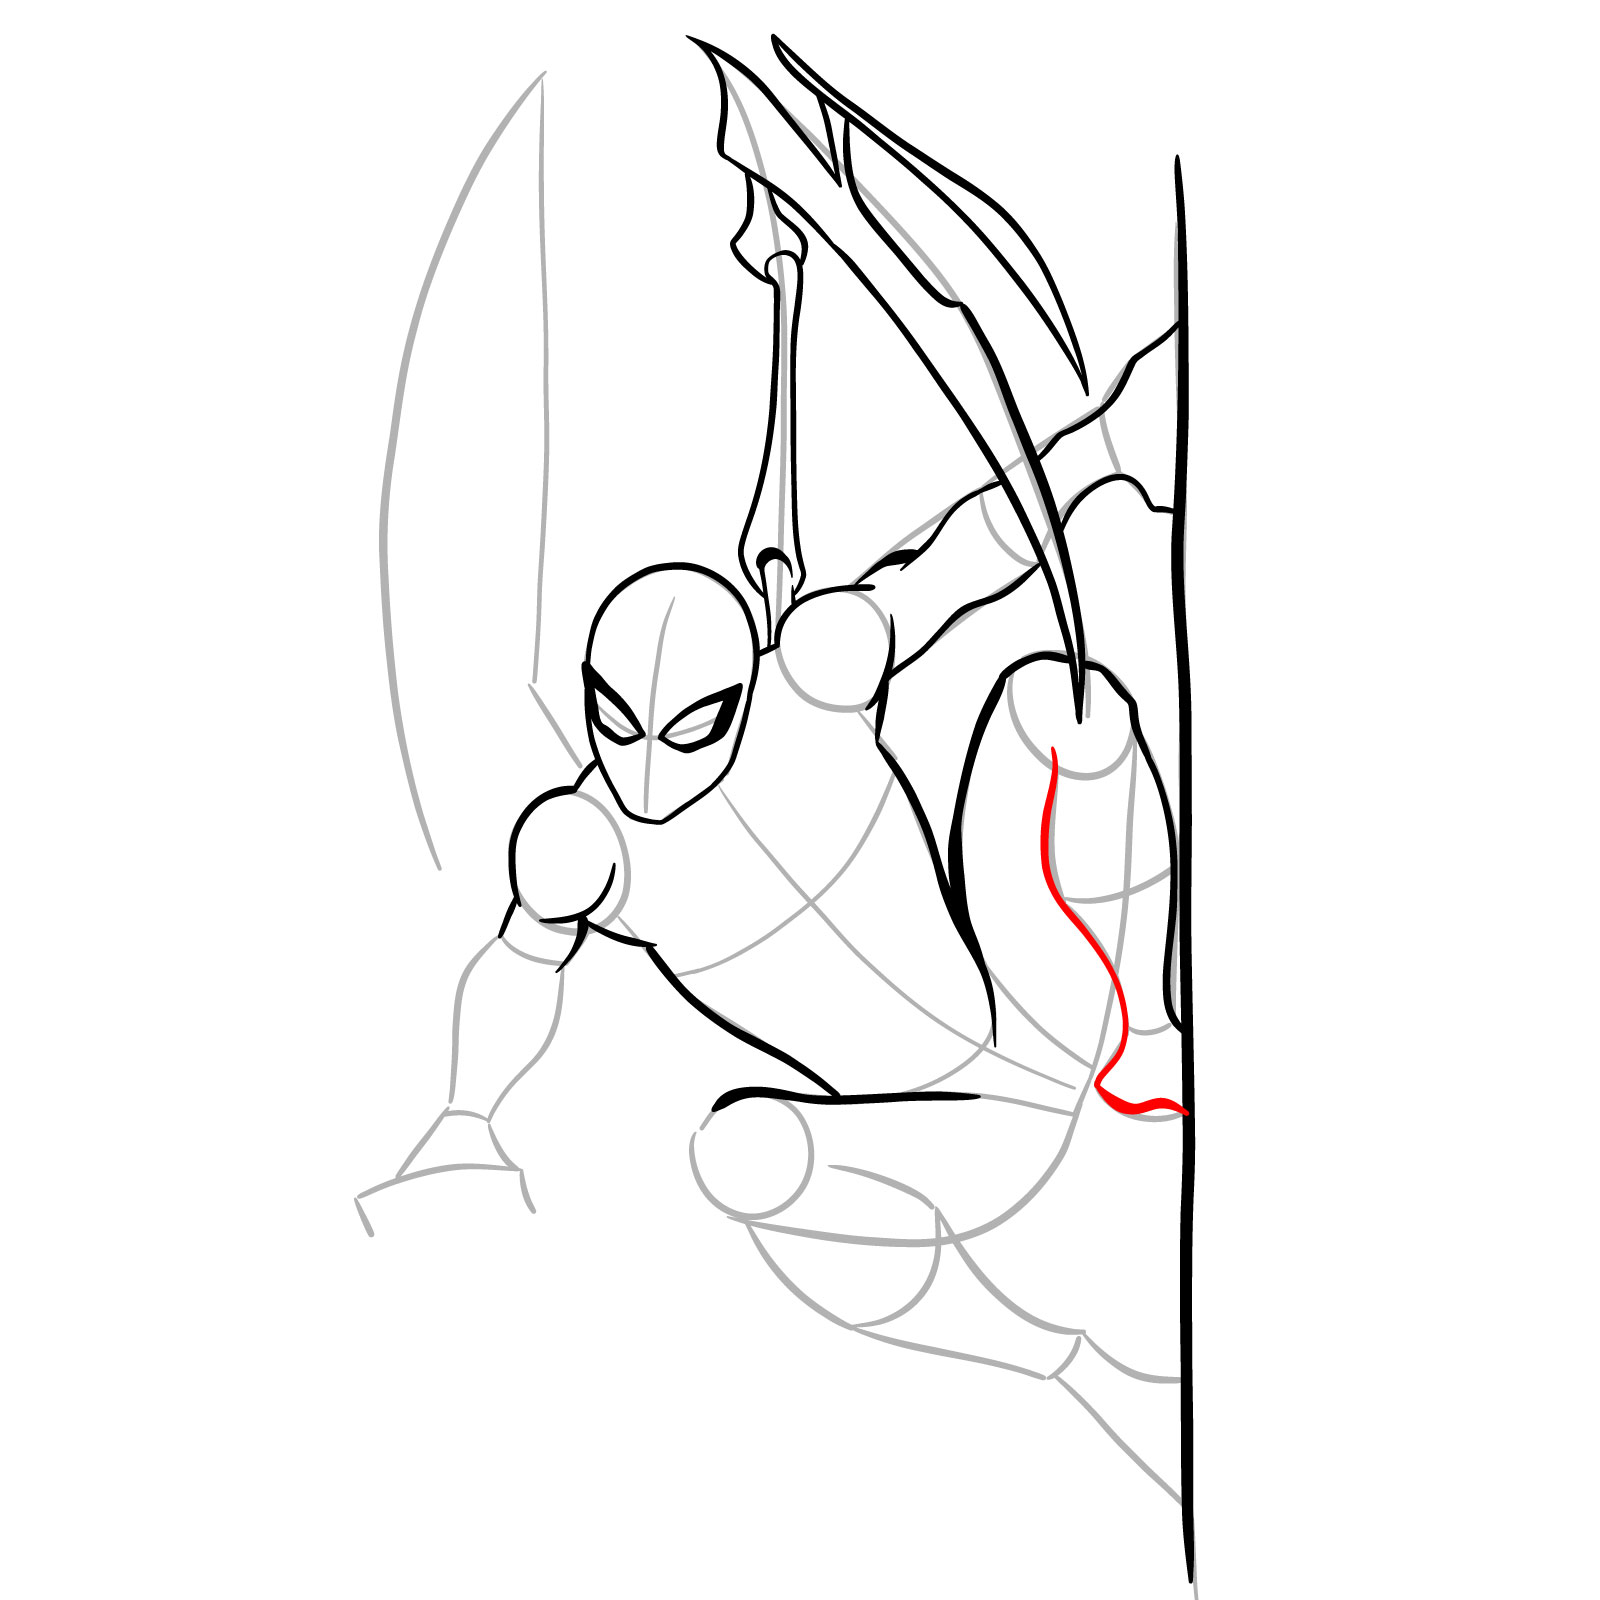 How to draw The Superior Spider-Man - step 19